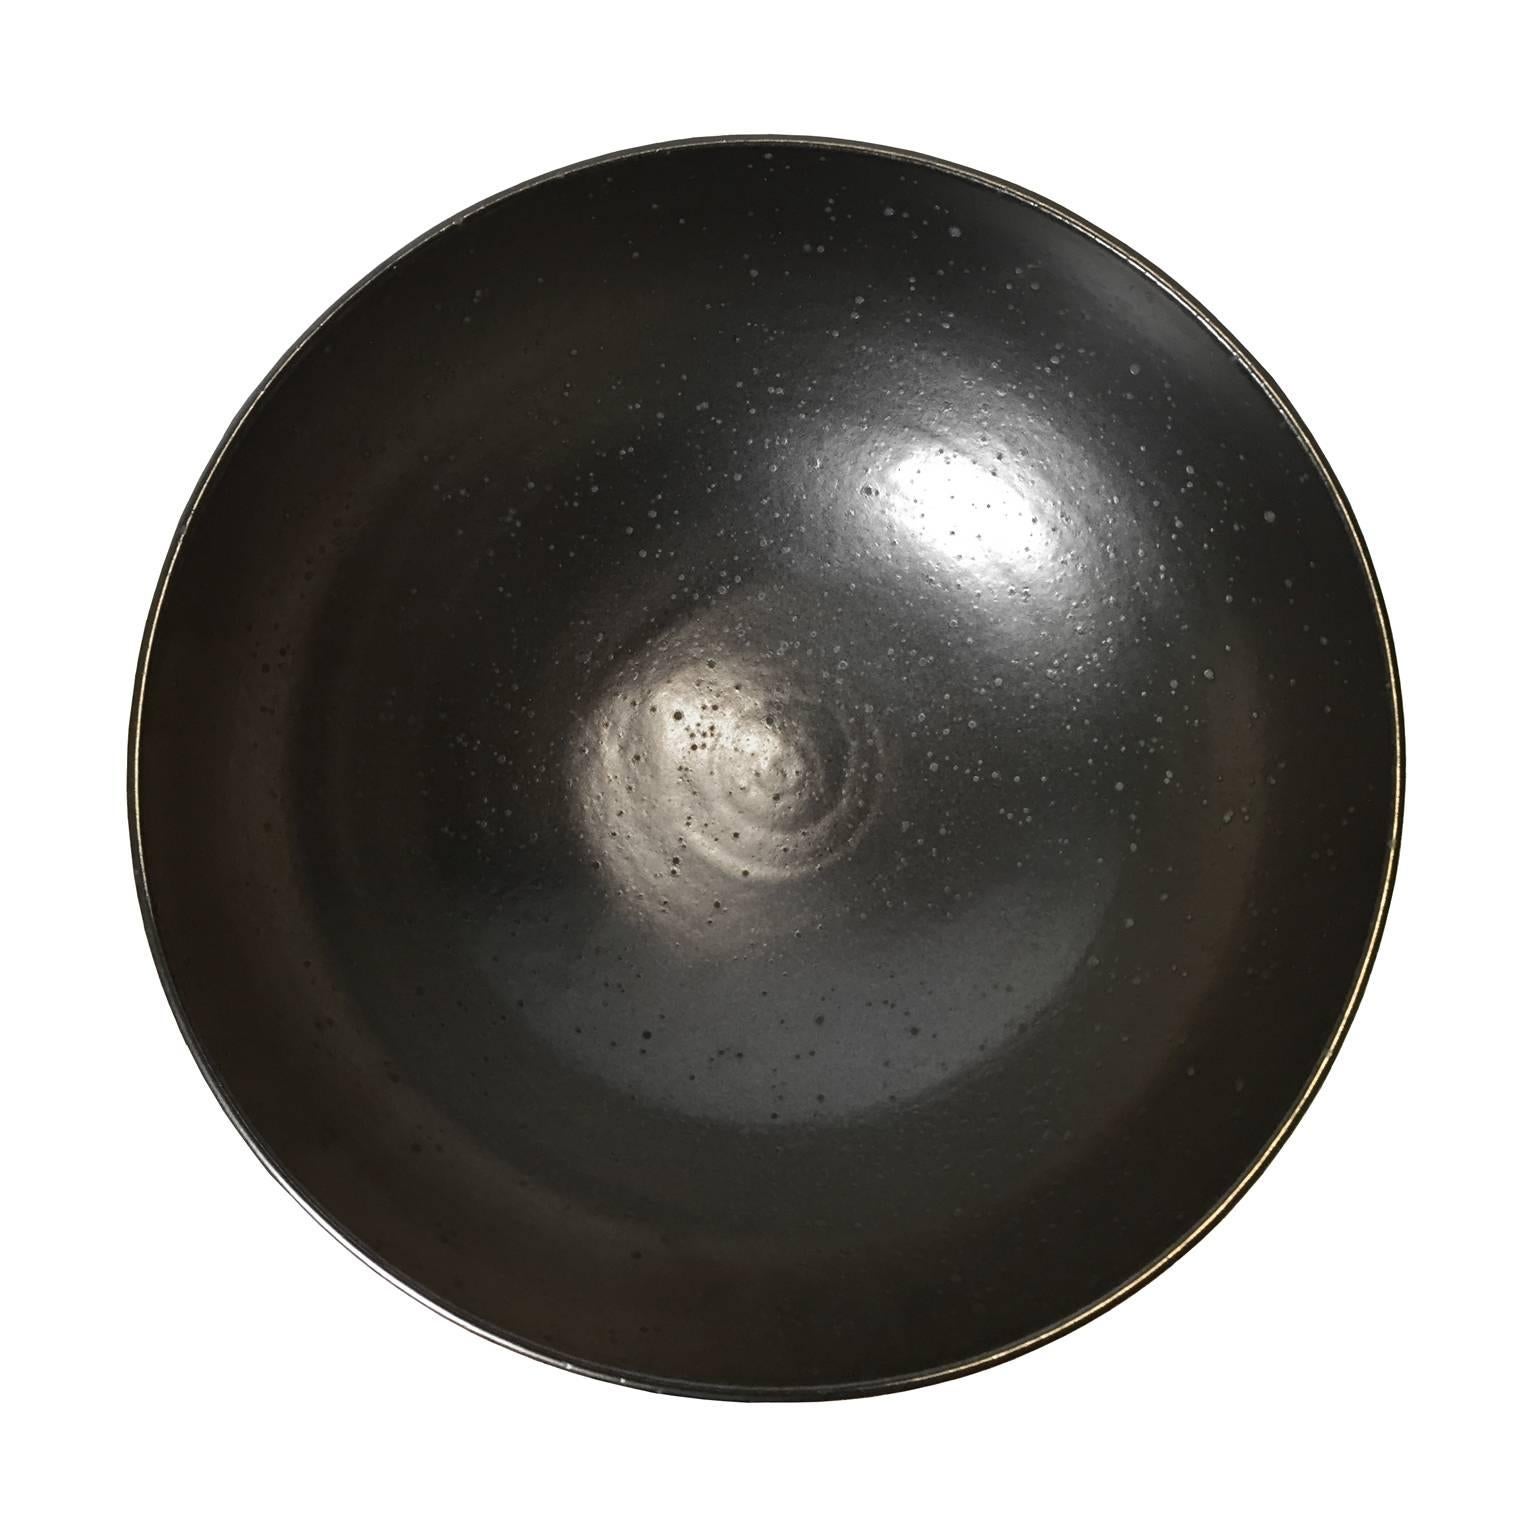 Black moonscape glaze large ceramic bowl by Sandi Fellman, USA, 2017. 

Veteran photographer Sandi Fellman's ceramic vessels are an exploration of a new medium. The forms, palettes, and sensuality of her photos can be found within each piece. The